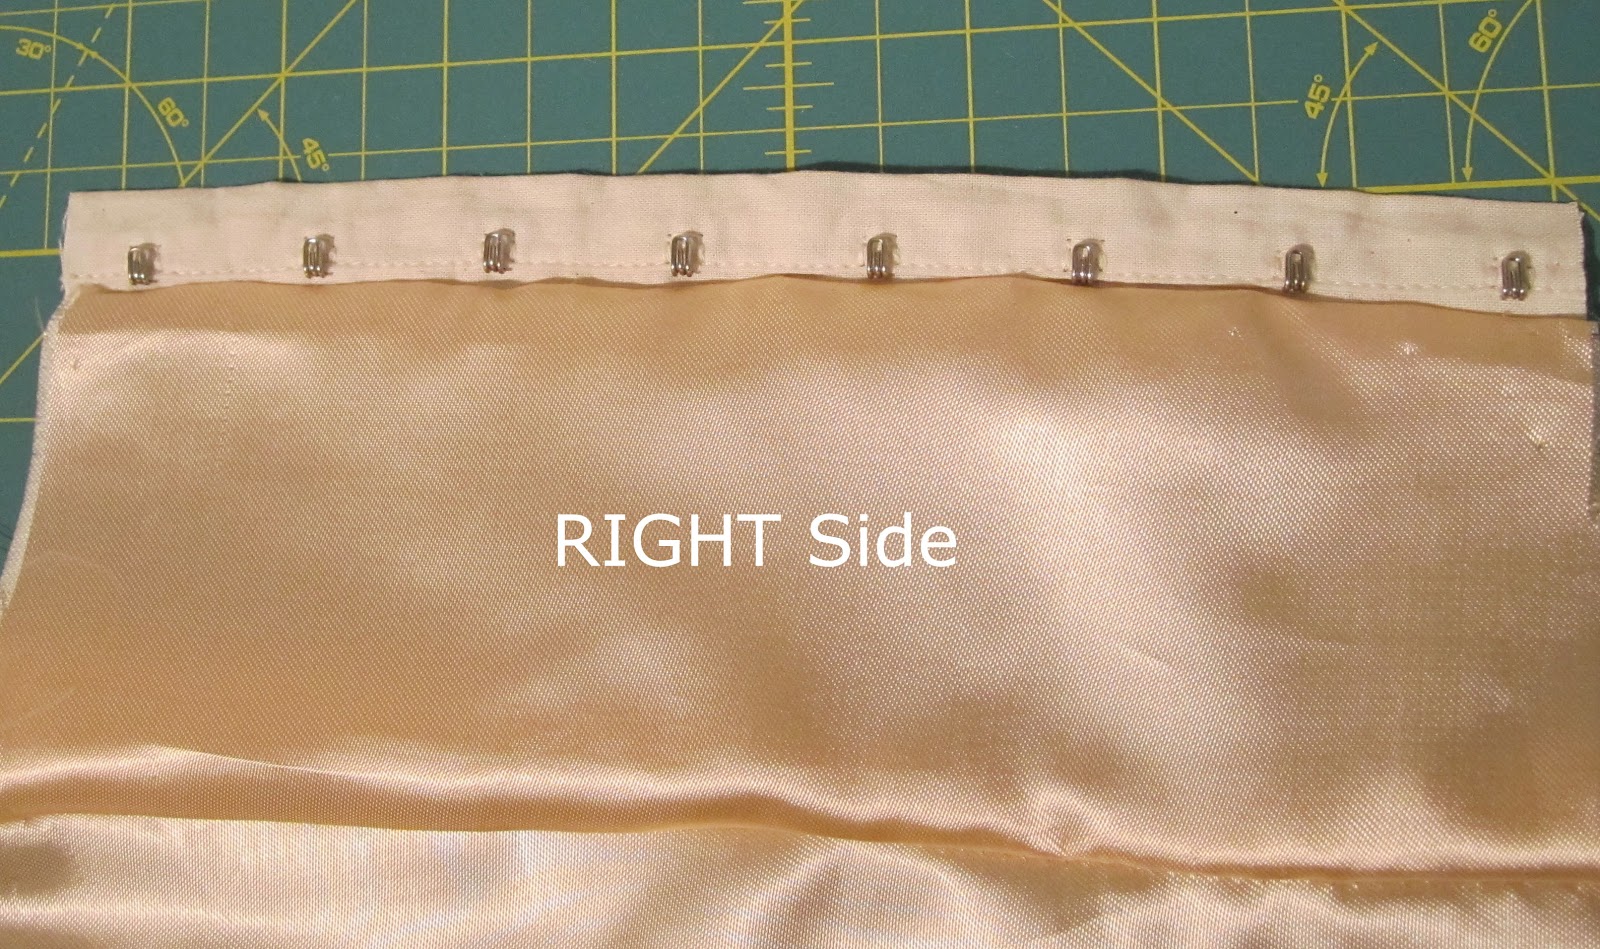 How to sew hook and eye, Method to stitch hook and eye